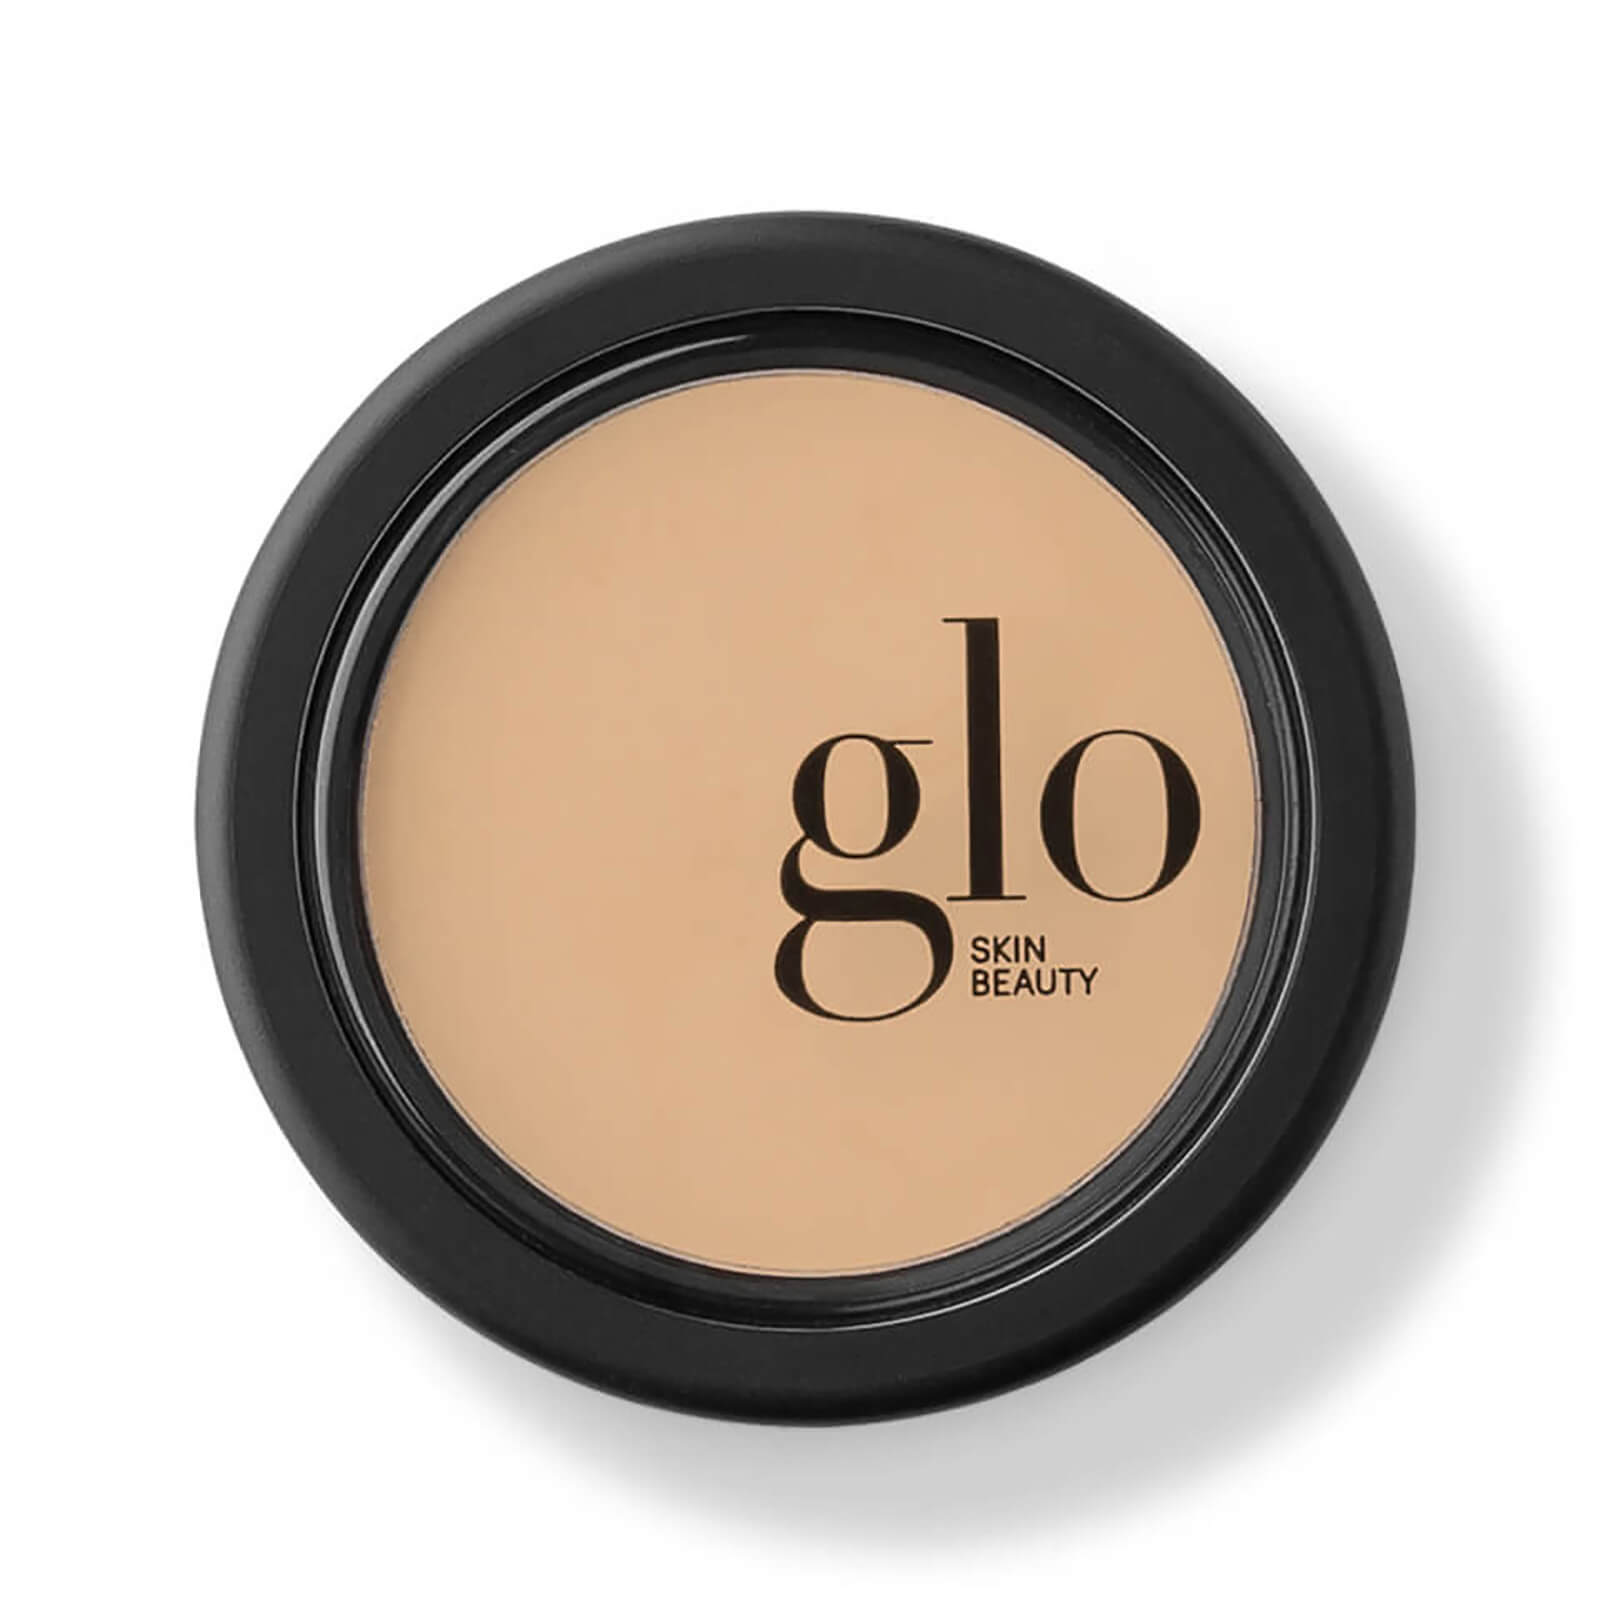 Glo Skin Beauty Oil-free Camouflage Concealer (0.11 Oz.) In Natural